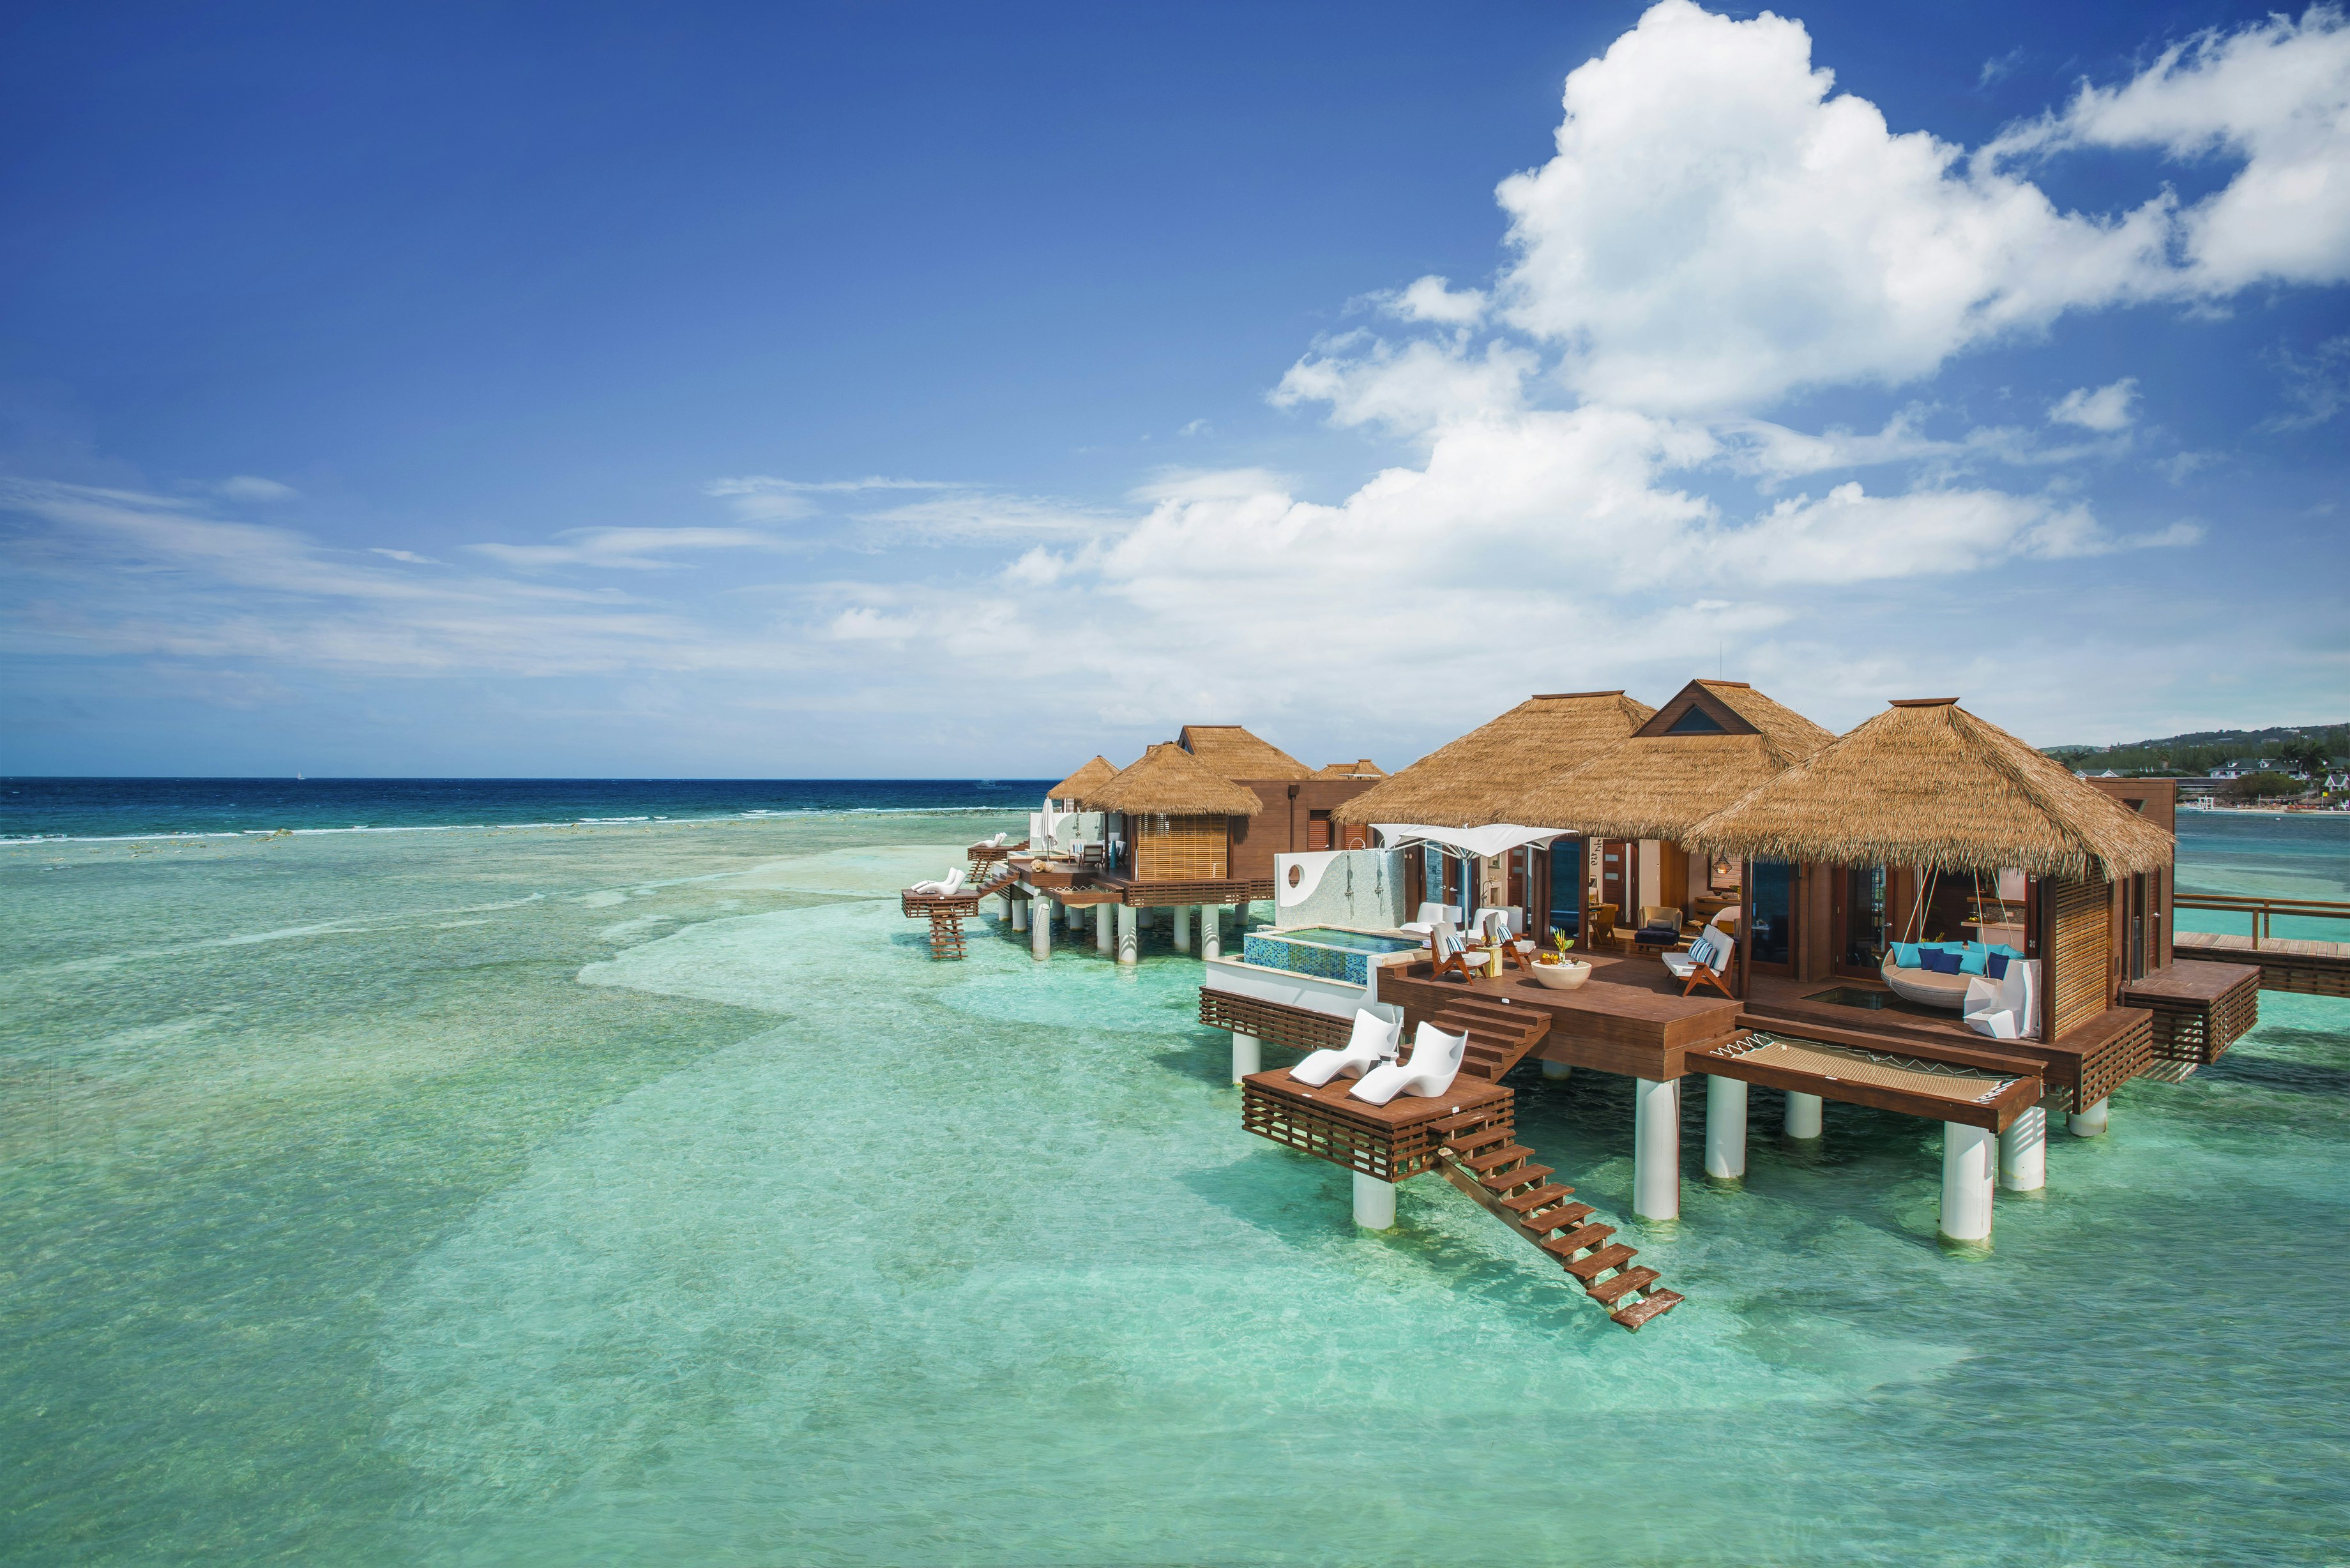 The clear, calm waters surround one of the overwater bungalows at Sandals Royal Caribbean